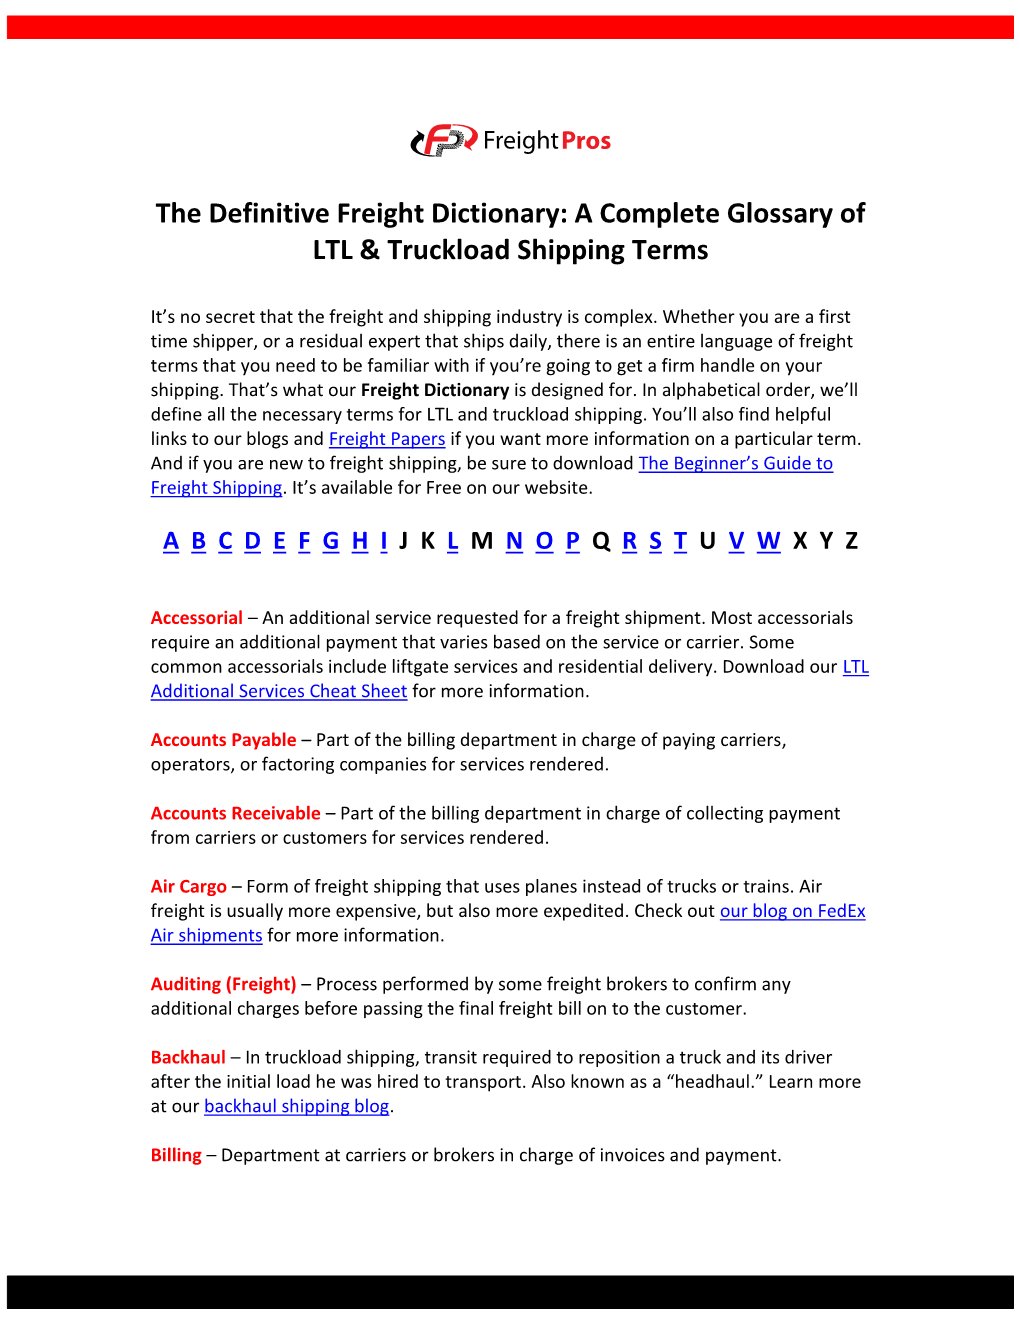 A Complete Glossary of LTL & Truckload Shipping Terms